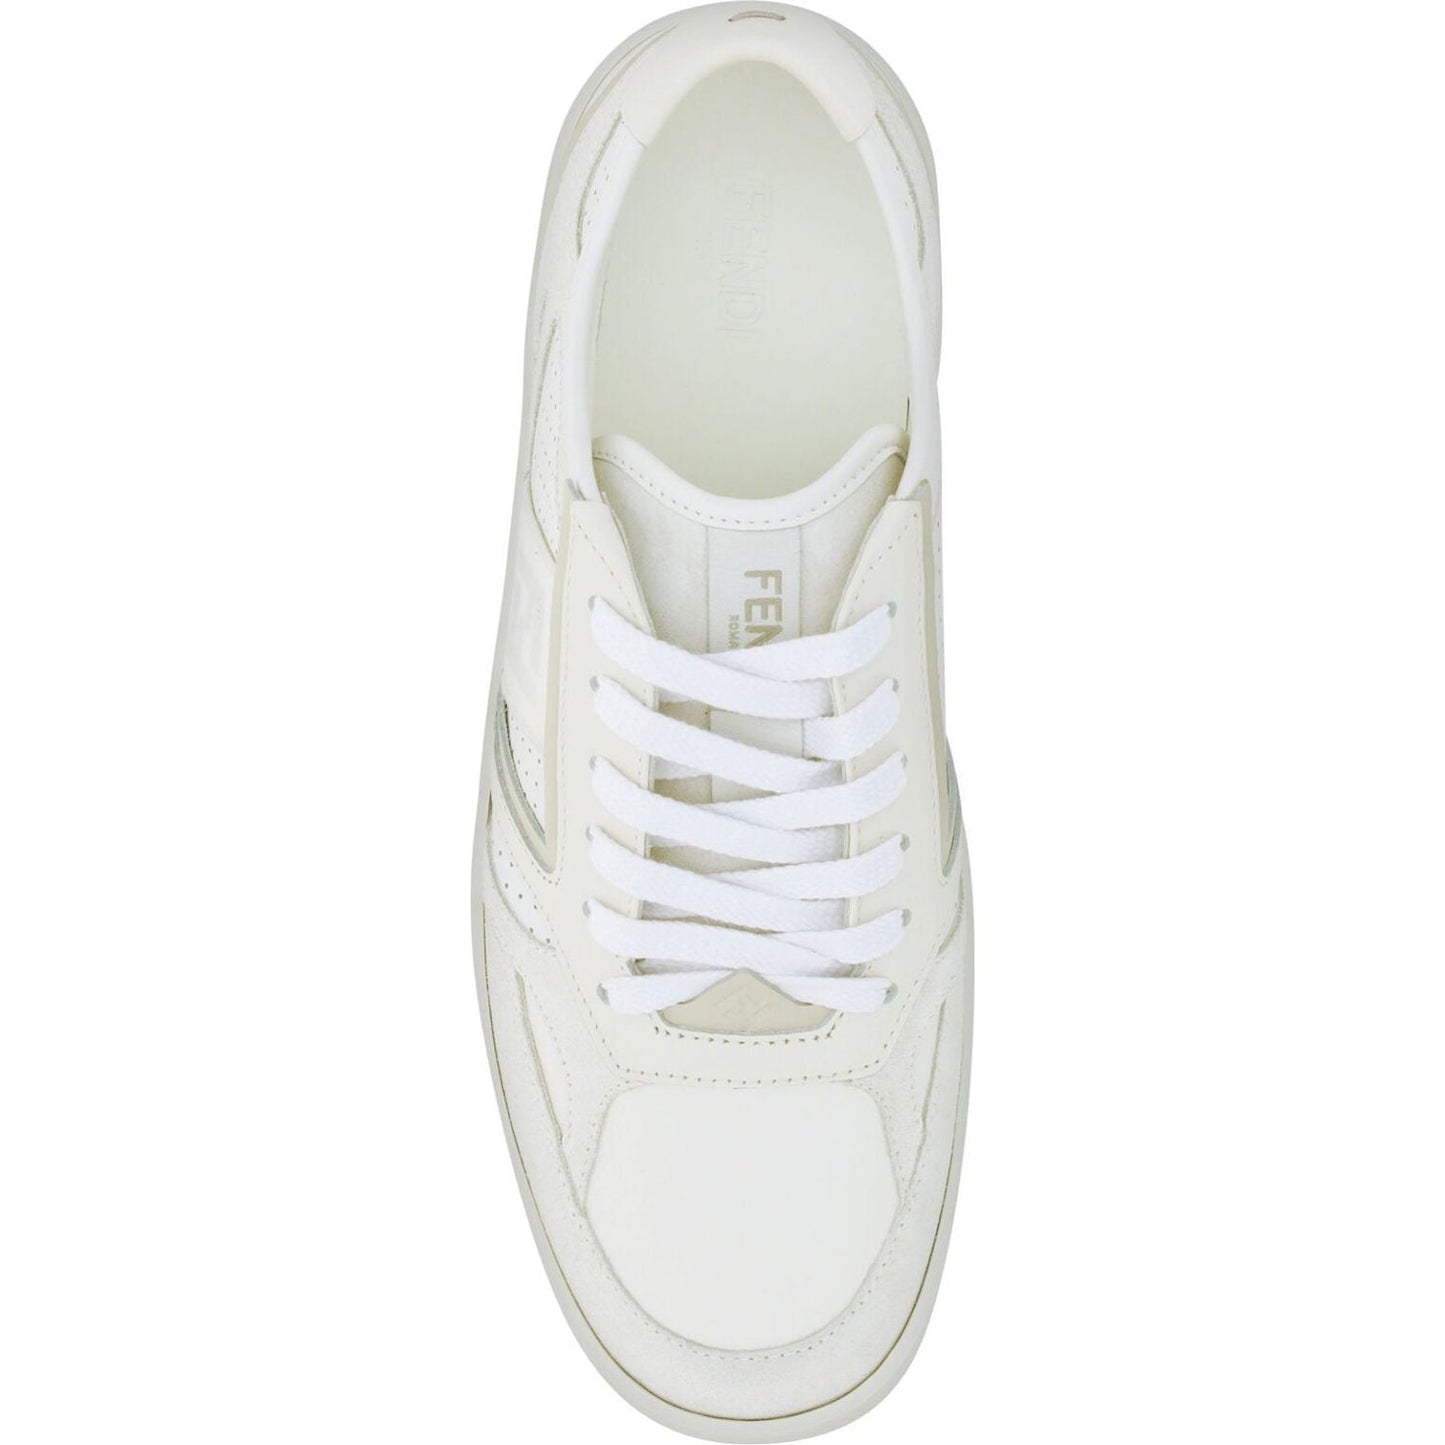 Fendi White Calf Leather Low Top Sneakers white-calf-leather-low-top-sneakers